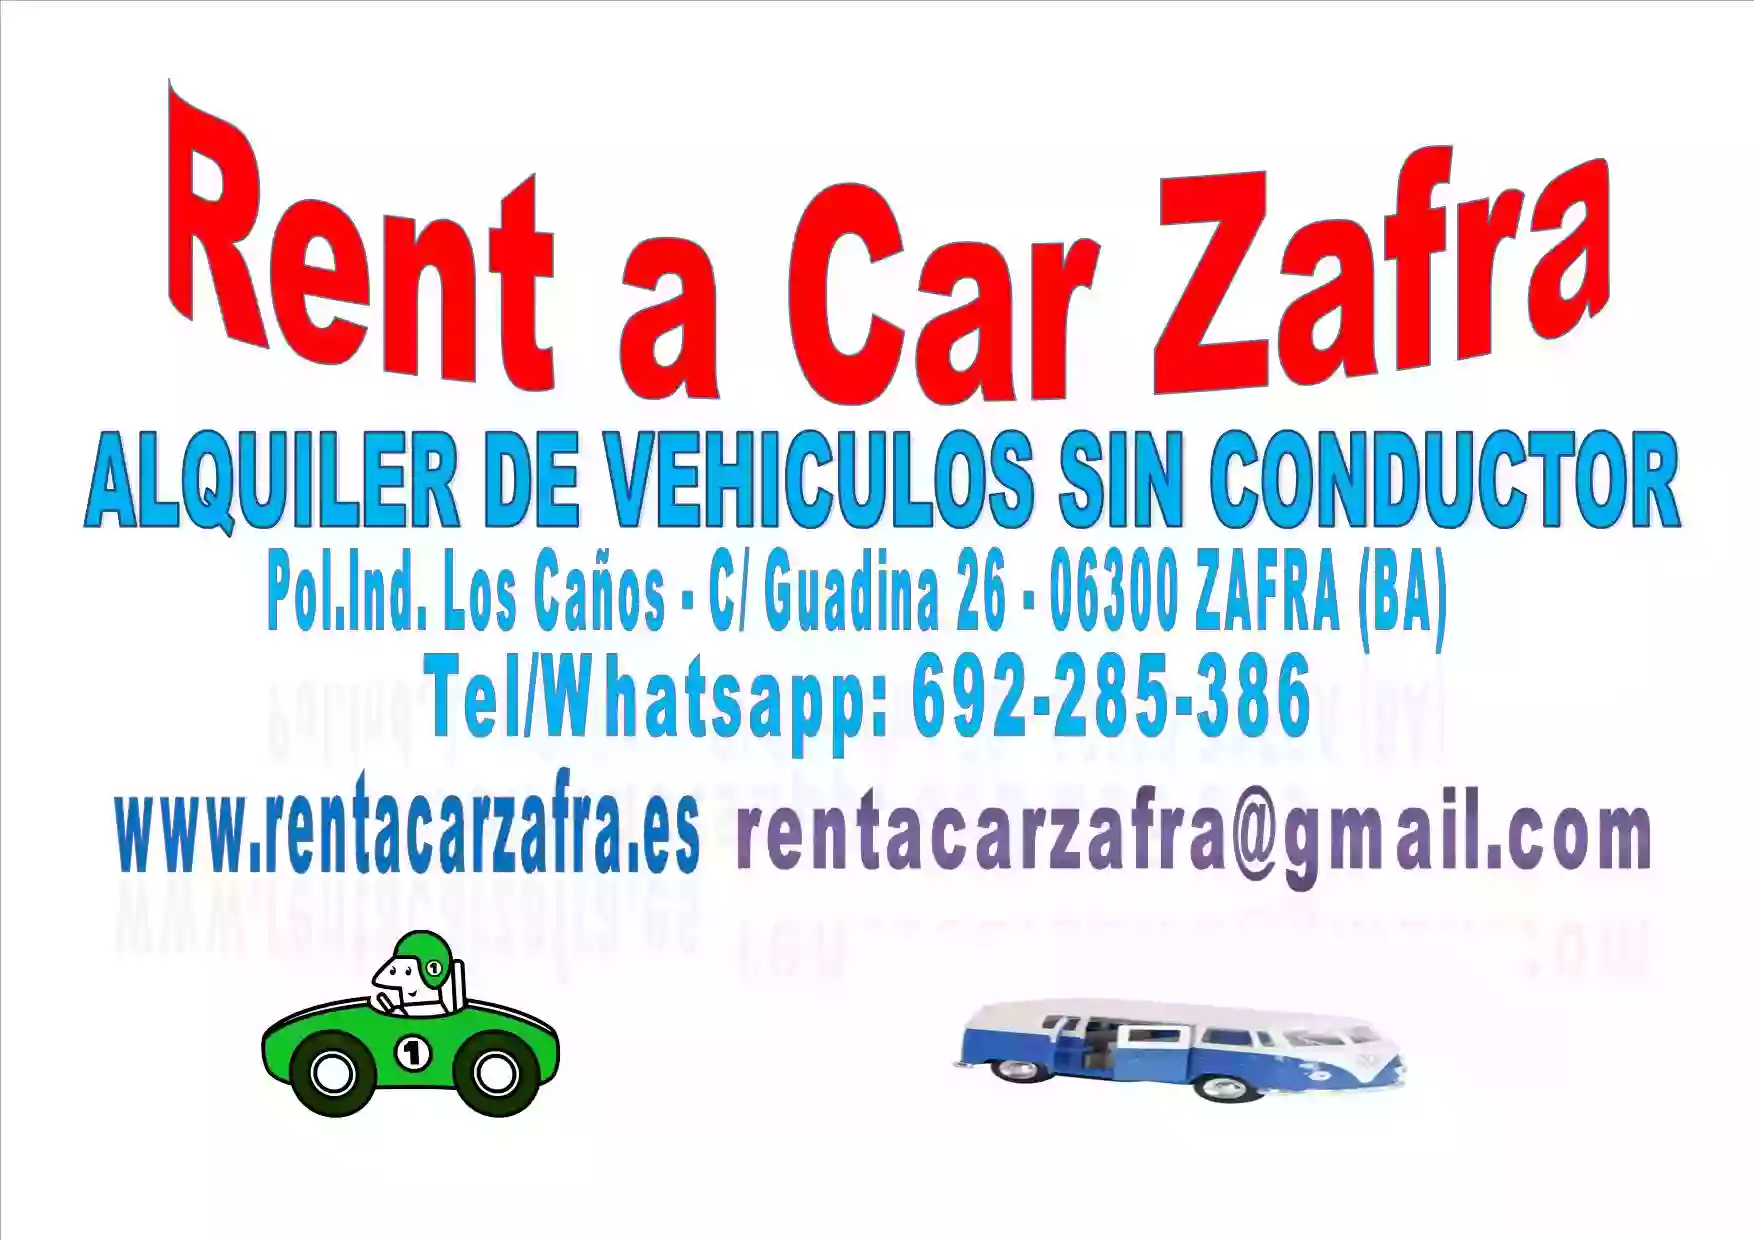 RENT A CAR ZAFRA - Low Cost